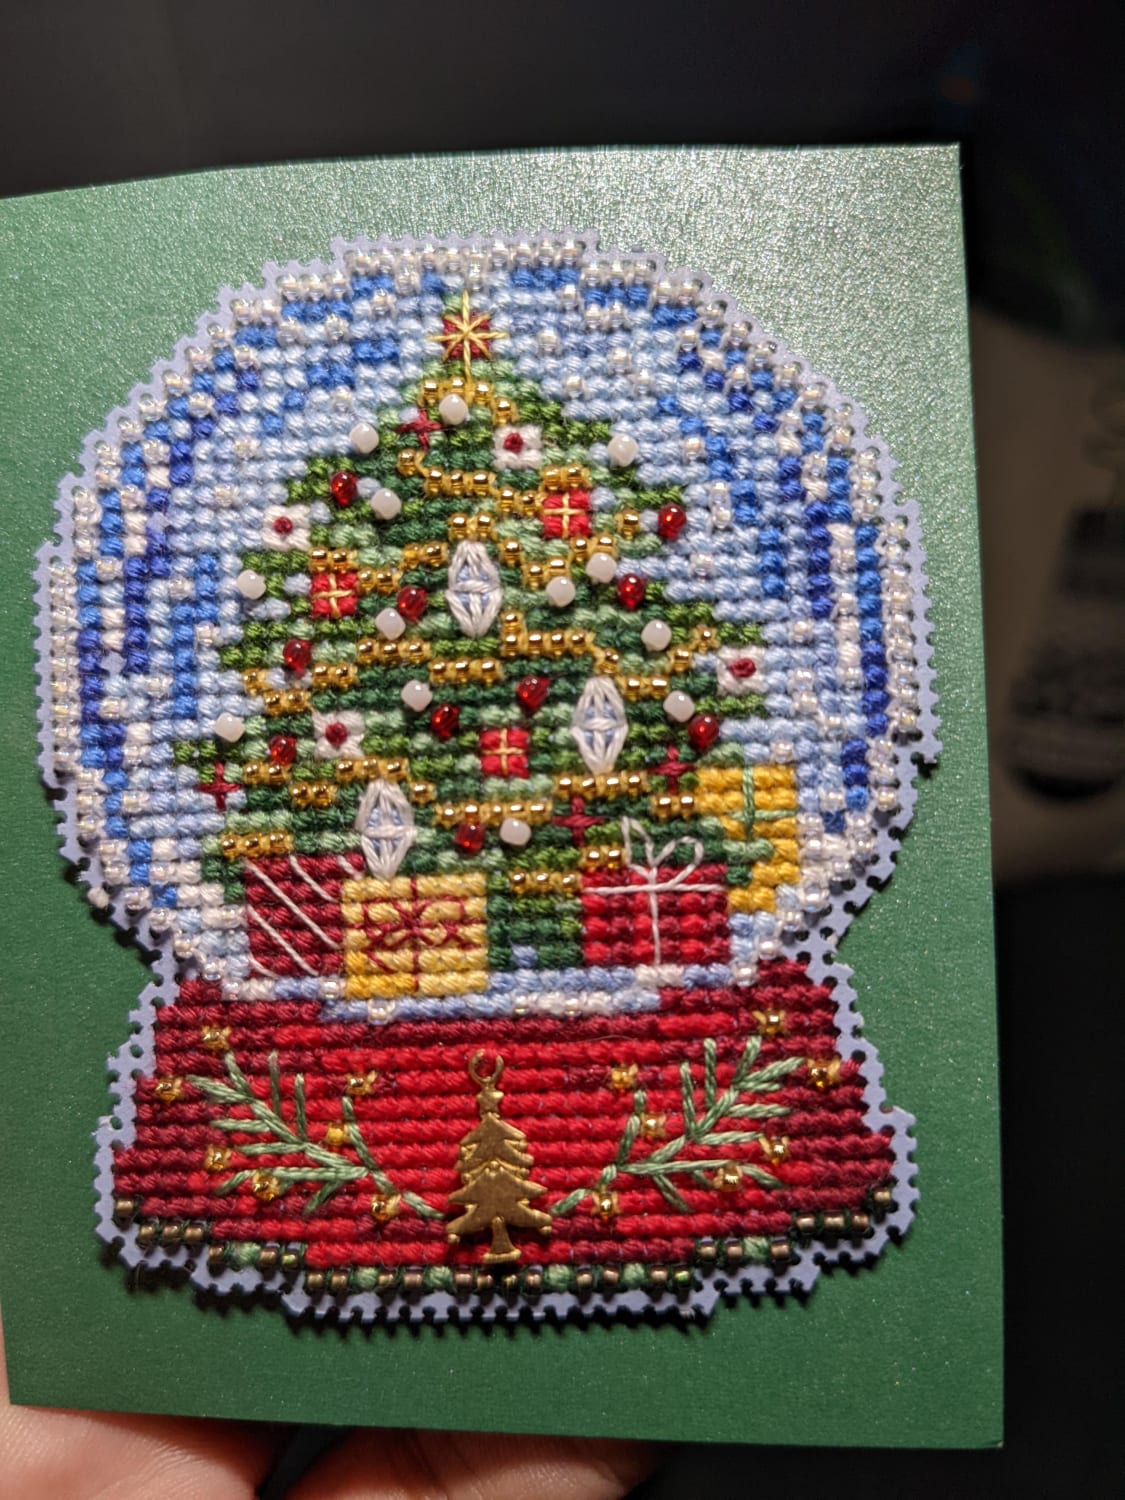 [FO] A quick Christmas stitch in between the SAL I'm doing this year! Mill Hill Snow Globe series Christmas Tree